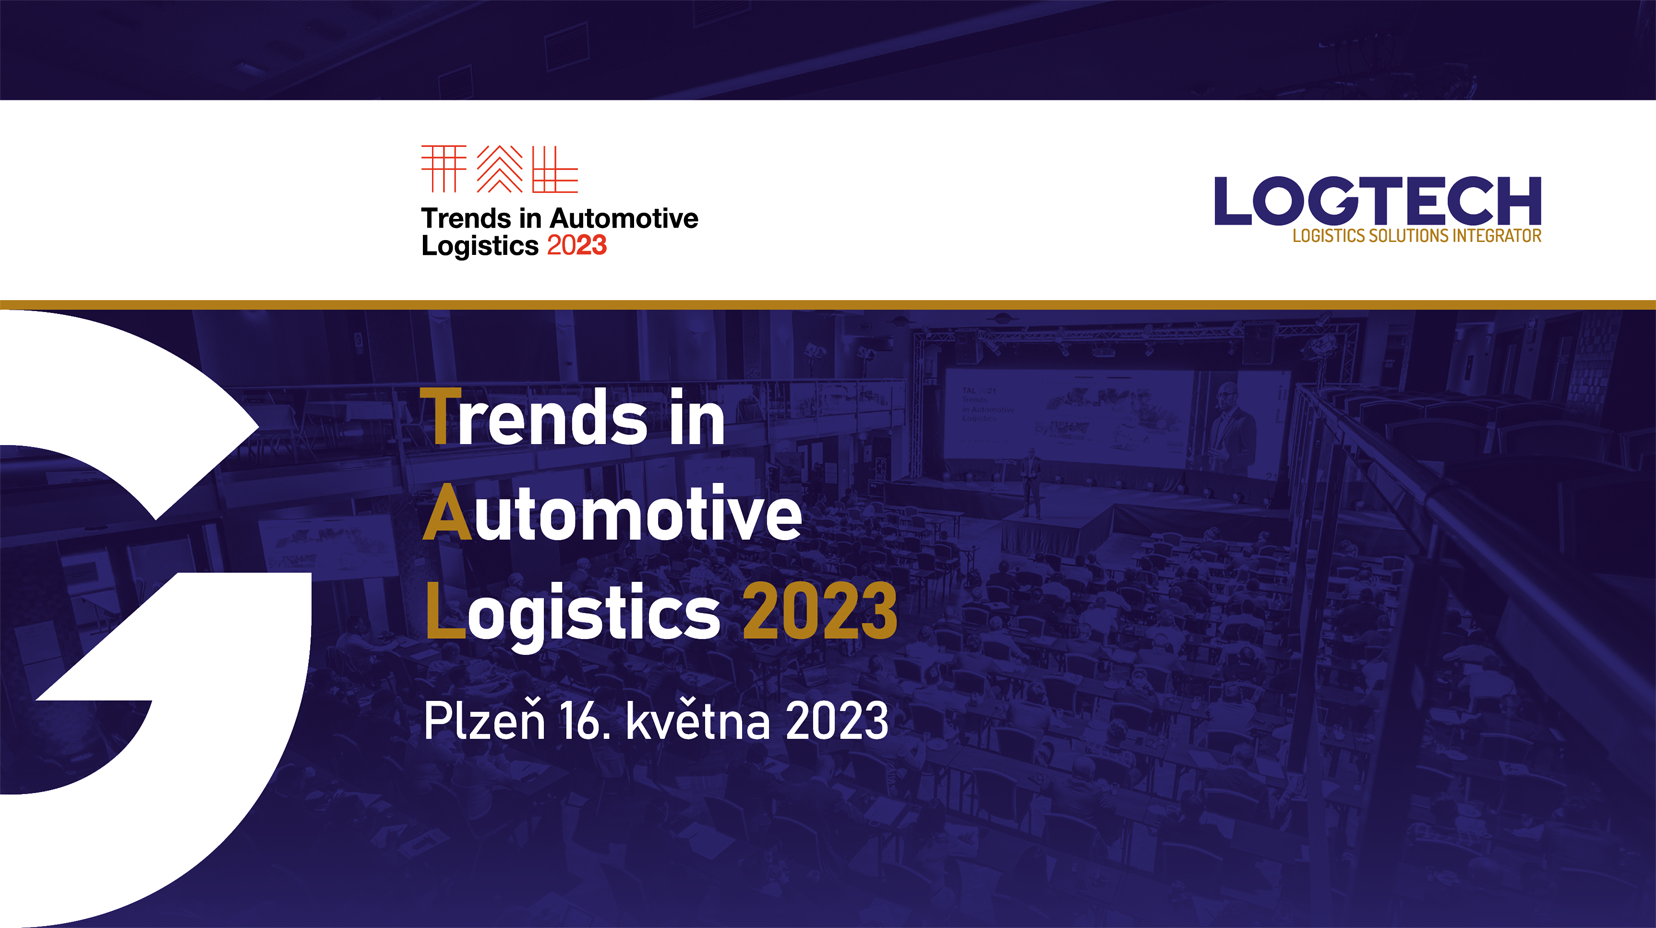 Trends in Automotive Logistics 2023 Conference